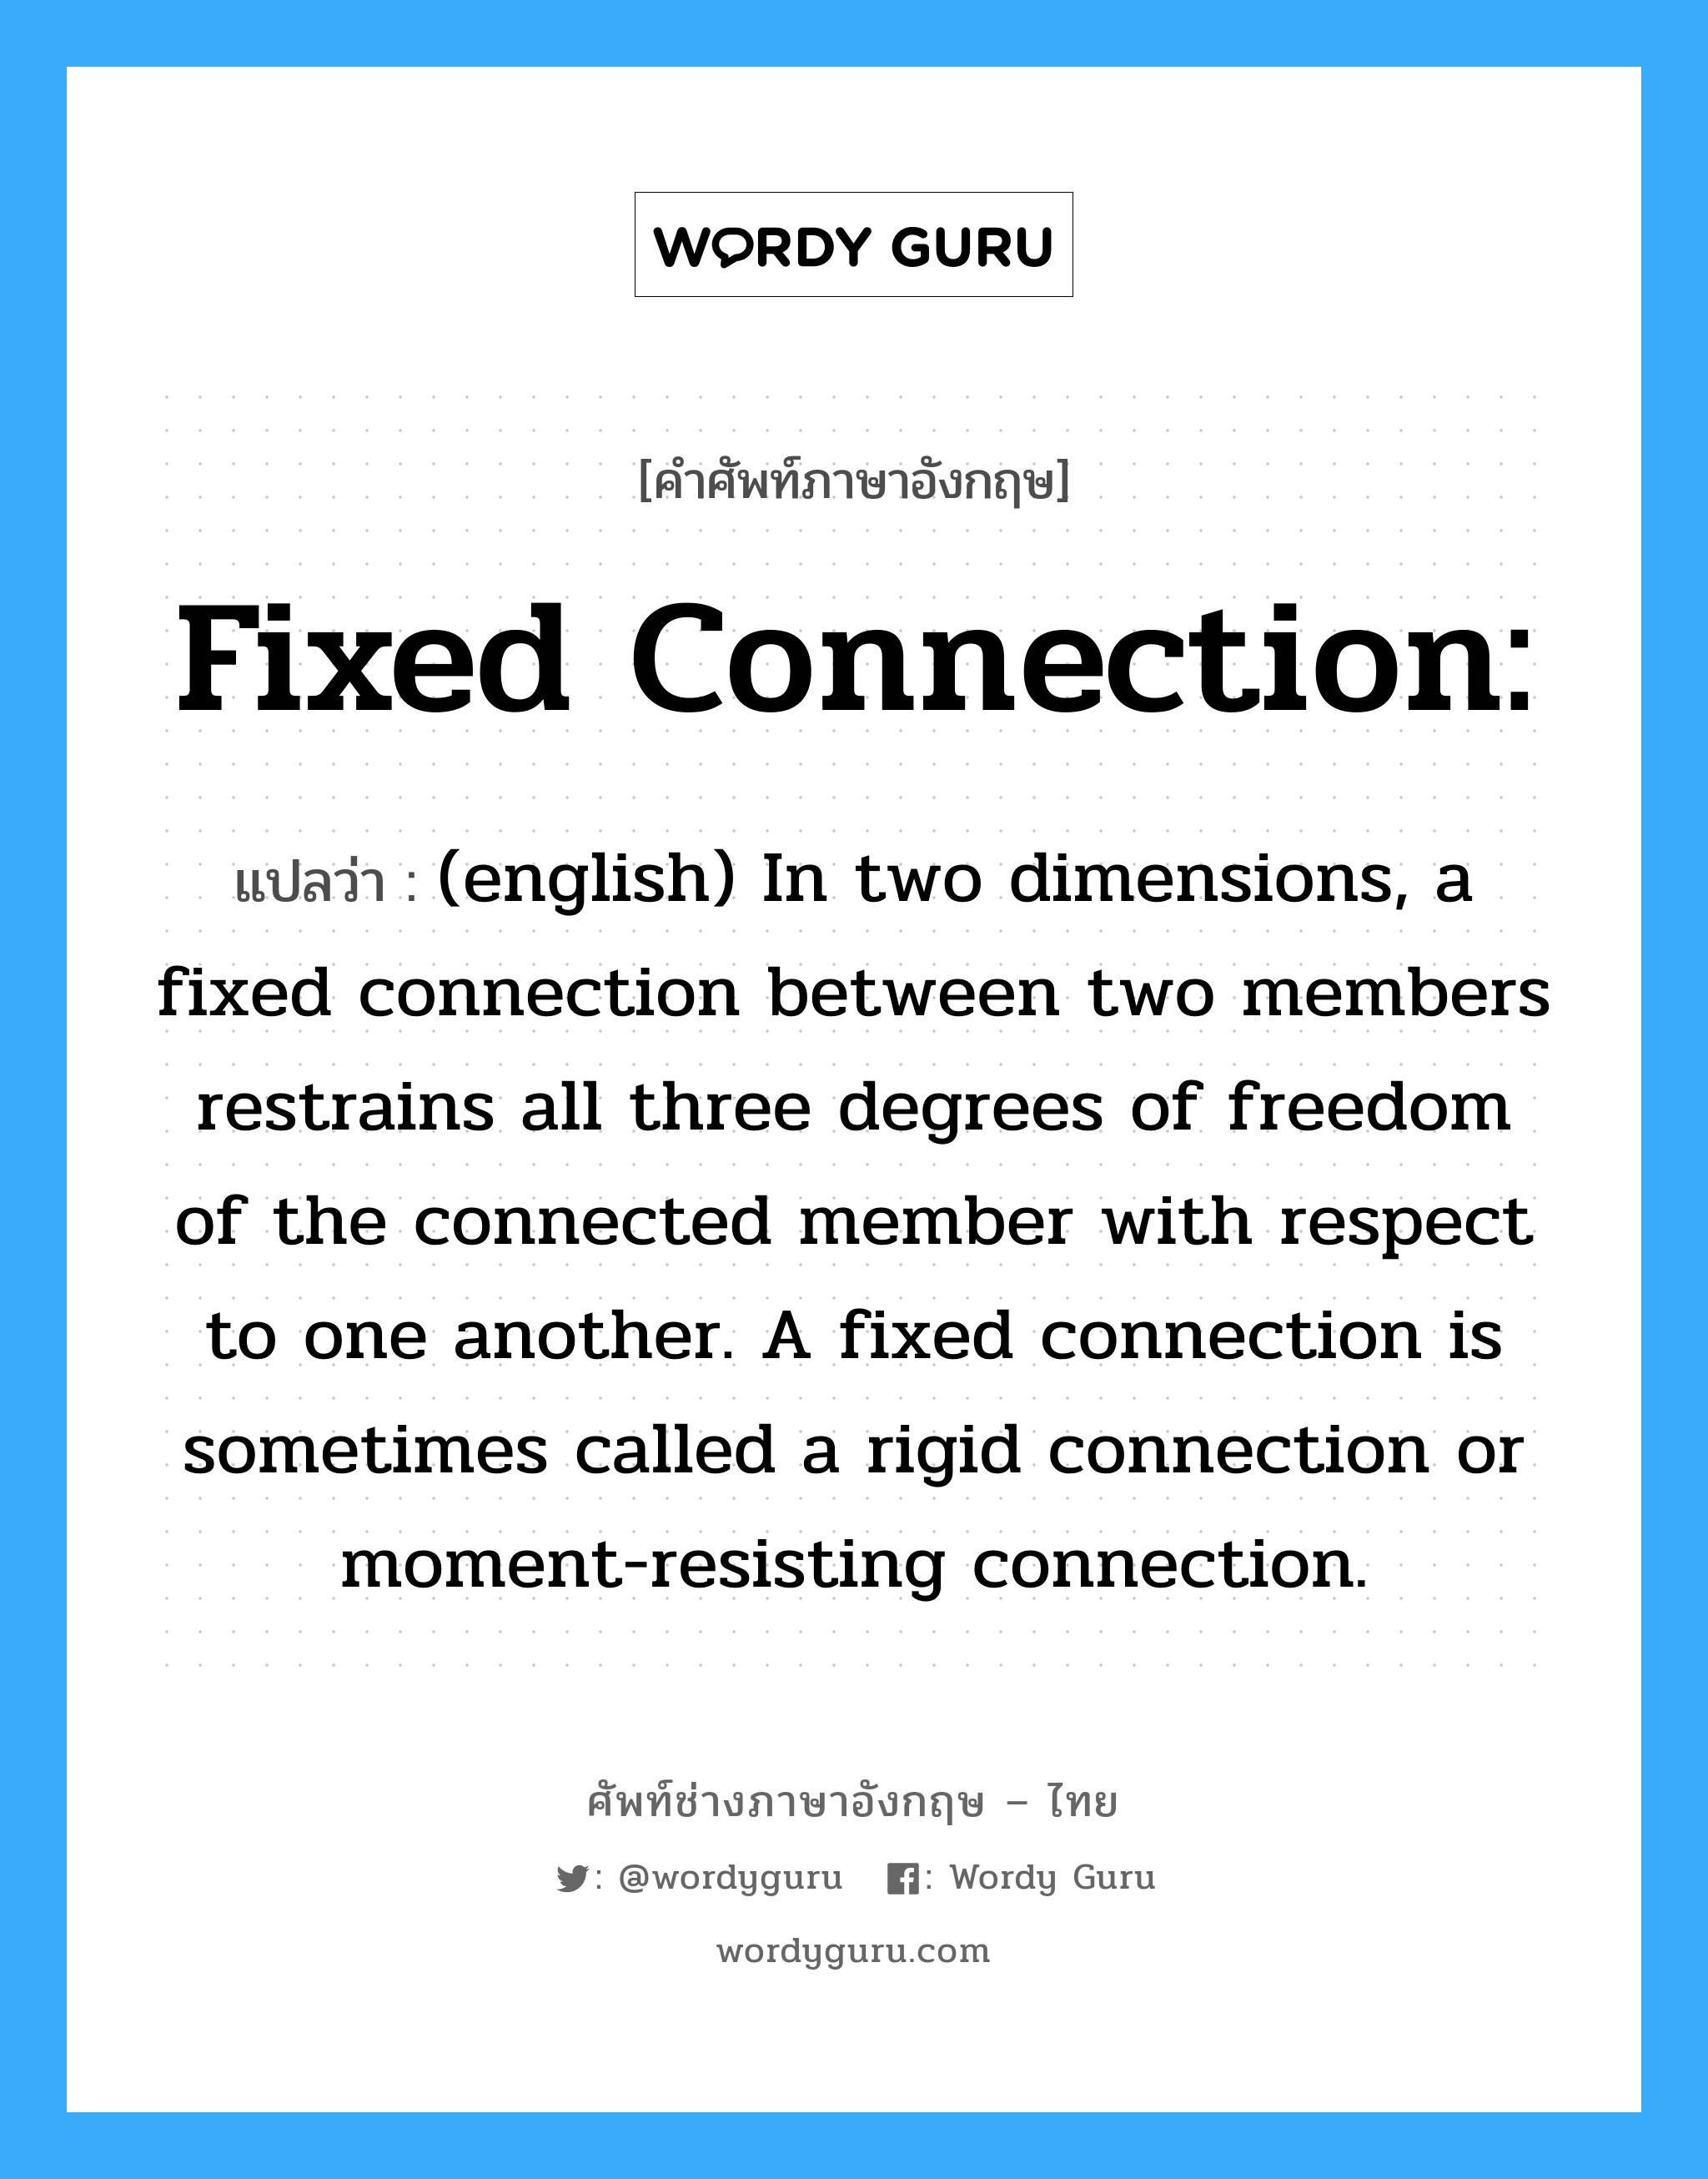 Fixed connection: แปลว่า?, คำศัพท์ช่างภาษาอังกฤษ - ไทย Fixed connection: คำศัพท์ภาษาอังกฤษ Fixed connection: แปลว่า (english) In two dimensions, a fixed connection between two members restrains all three degrees of freedom of the connected member with respect to one another. A fixed connection is sometimes called a rigid connection or moment-resisting connection.